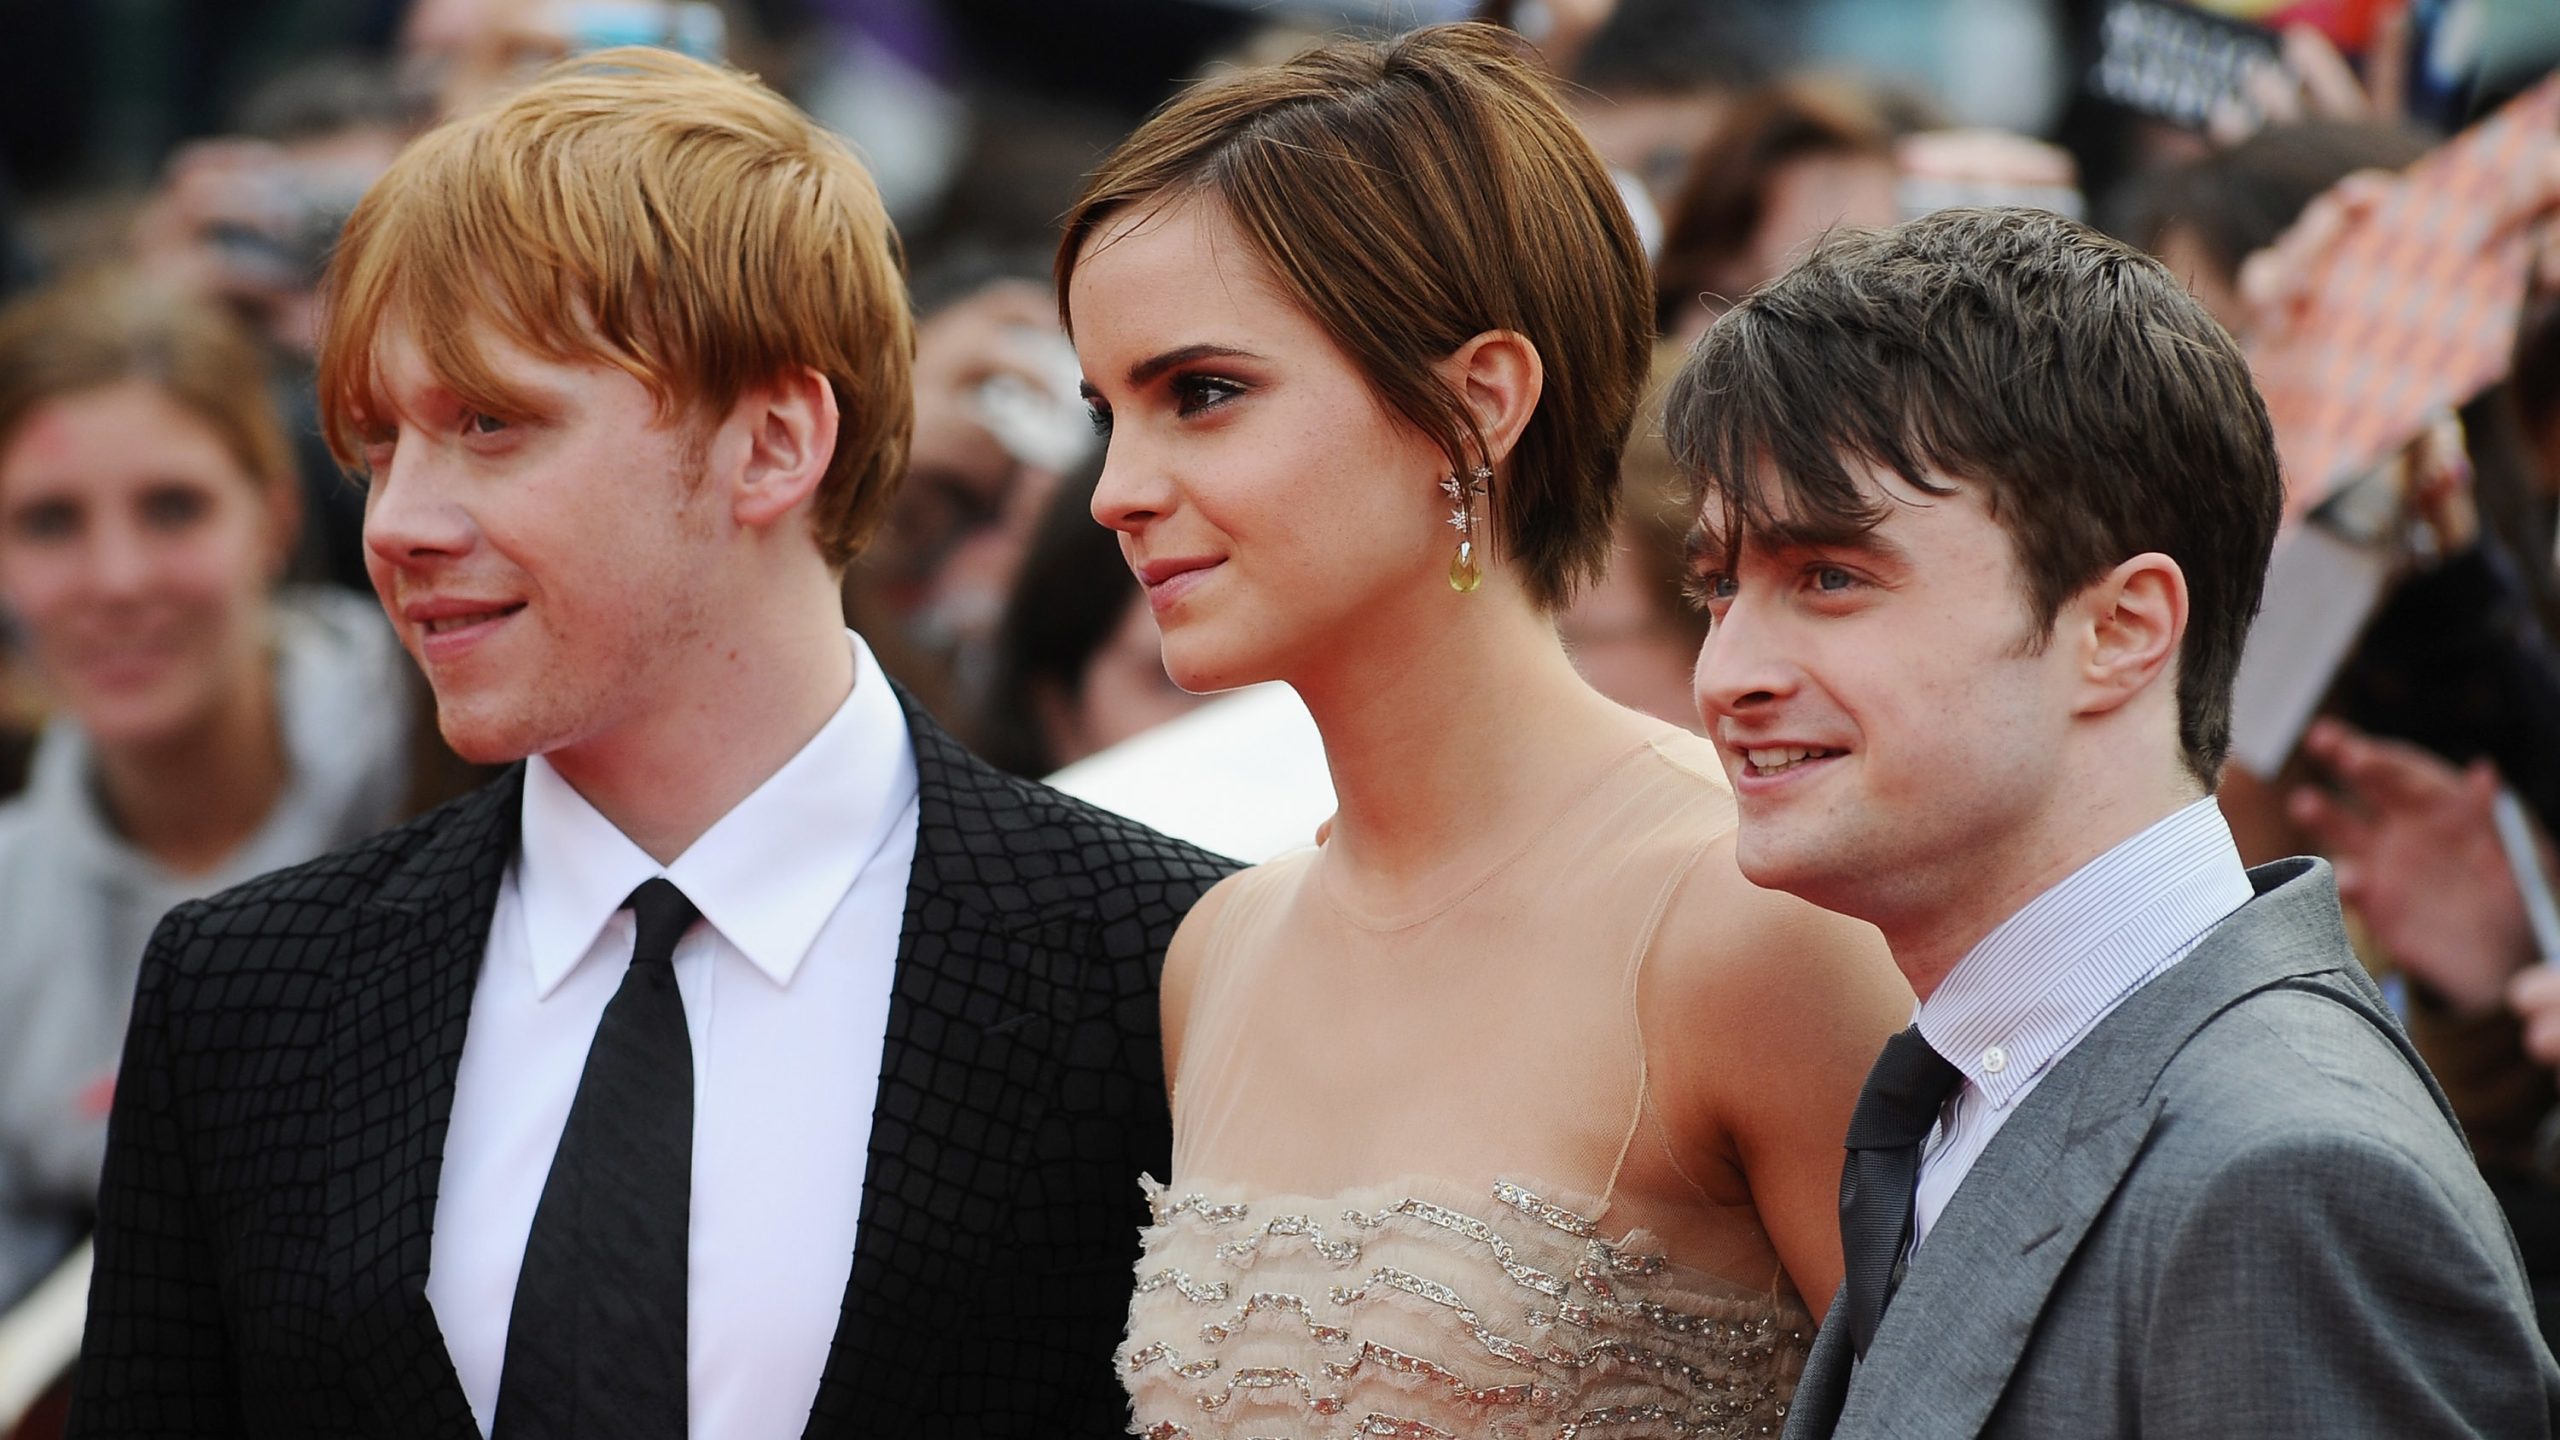 The cast of Harry Potter And The Deathly Hallows - Part 2 - World Film Premiere